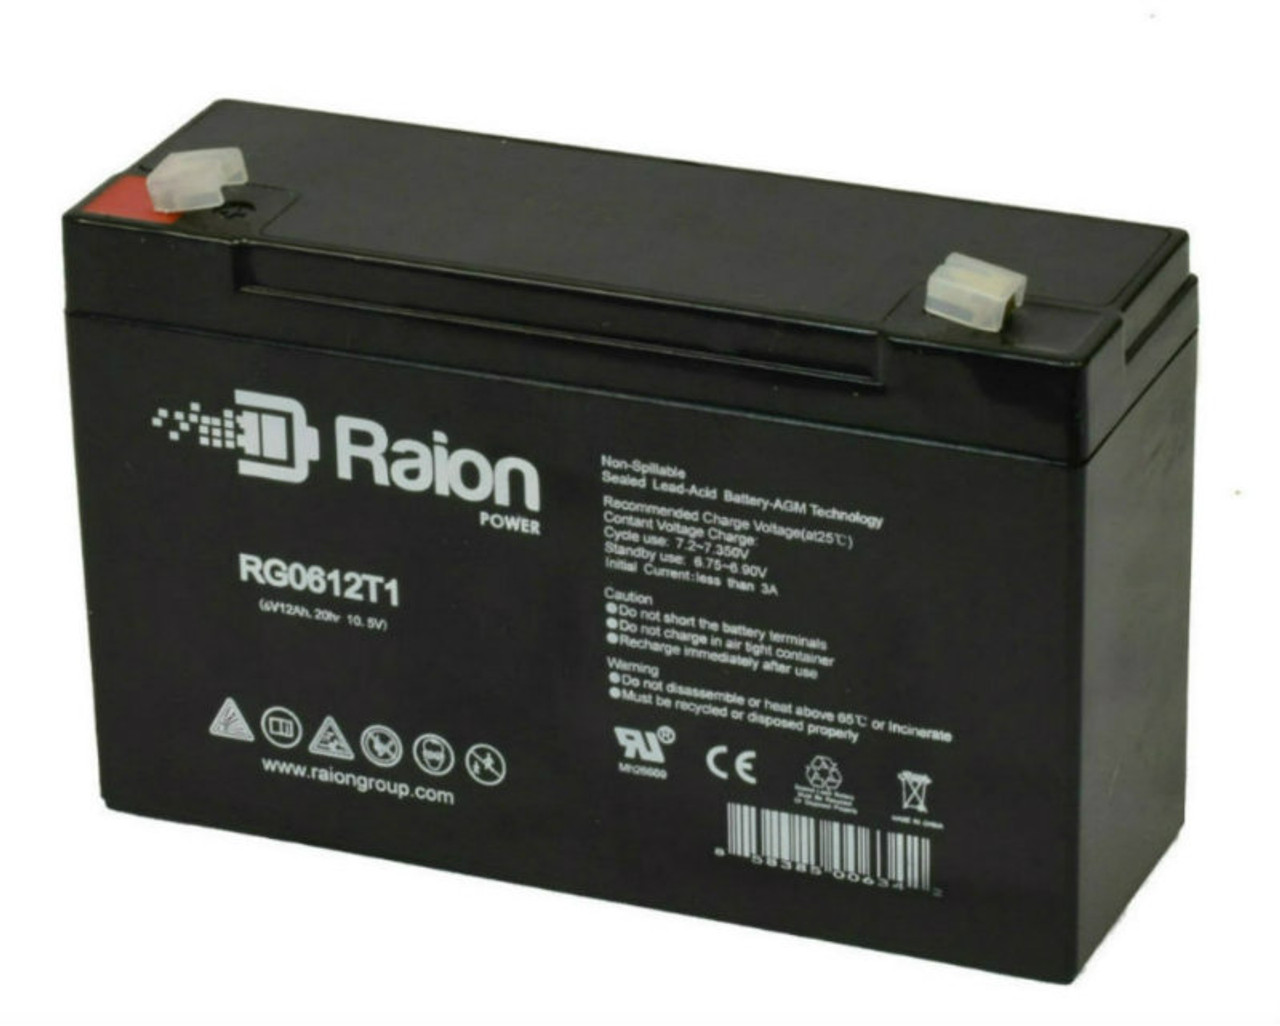 Raion Power RG06120T1 Replacement 6V 12Ah Emergency Light Battery for Siltron ELP1020